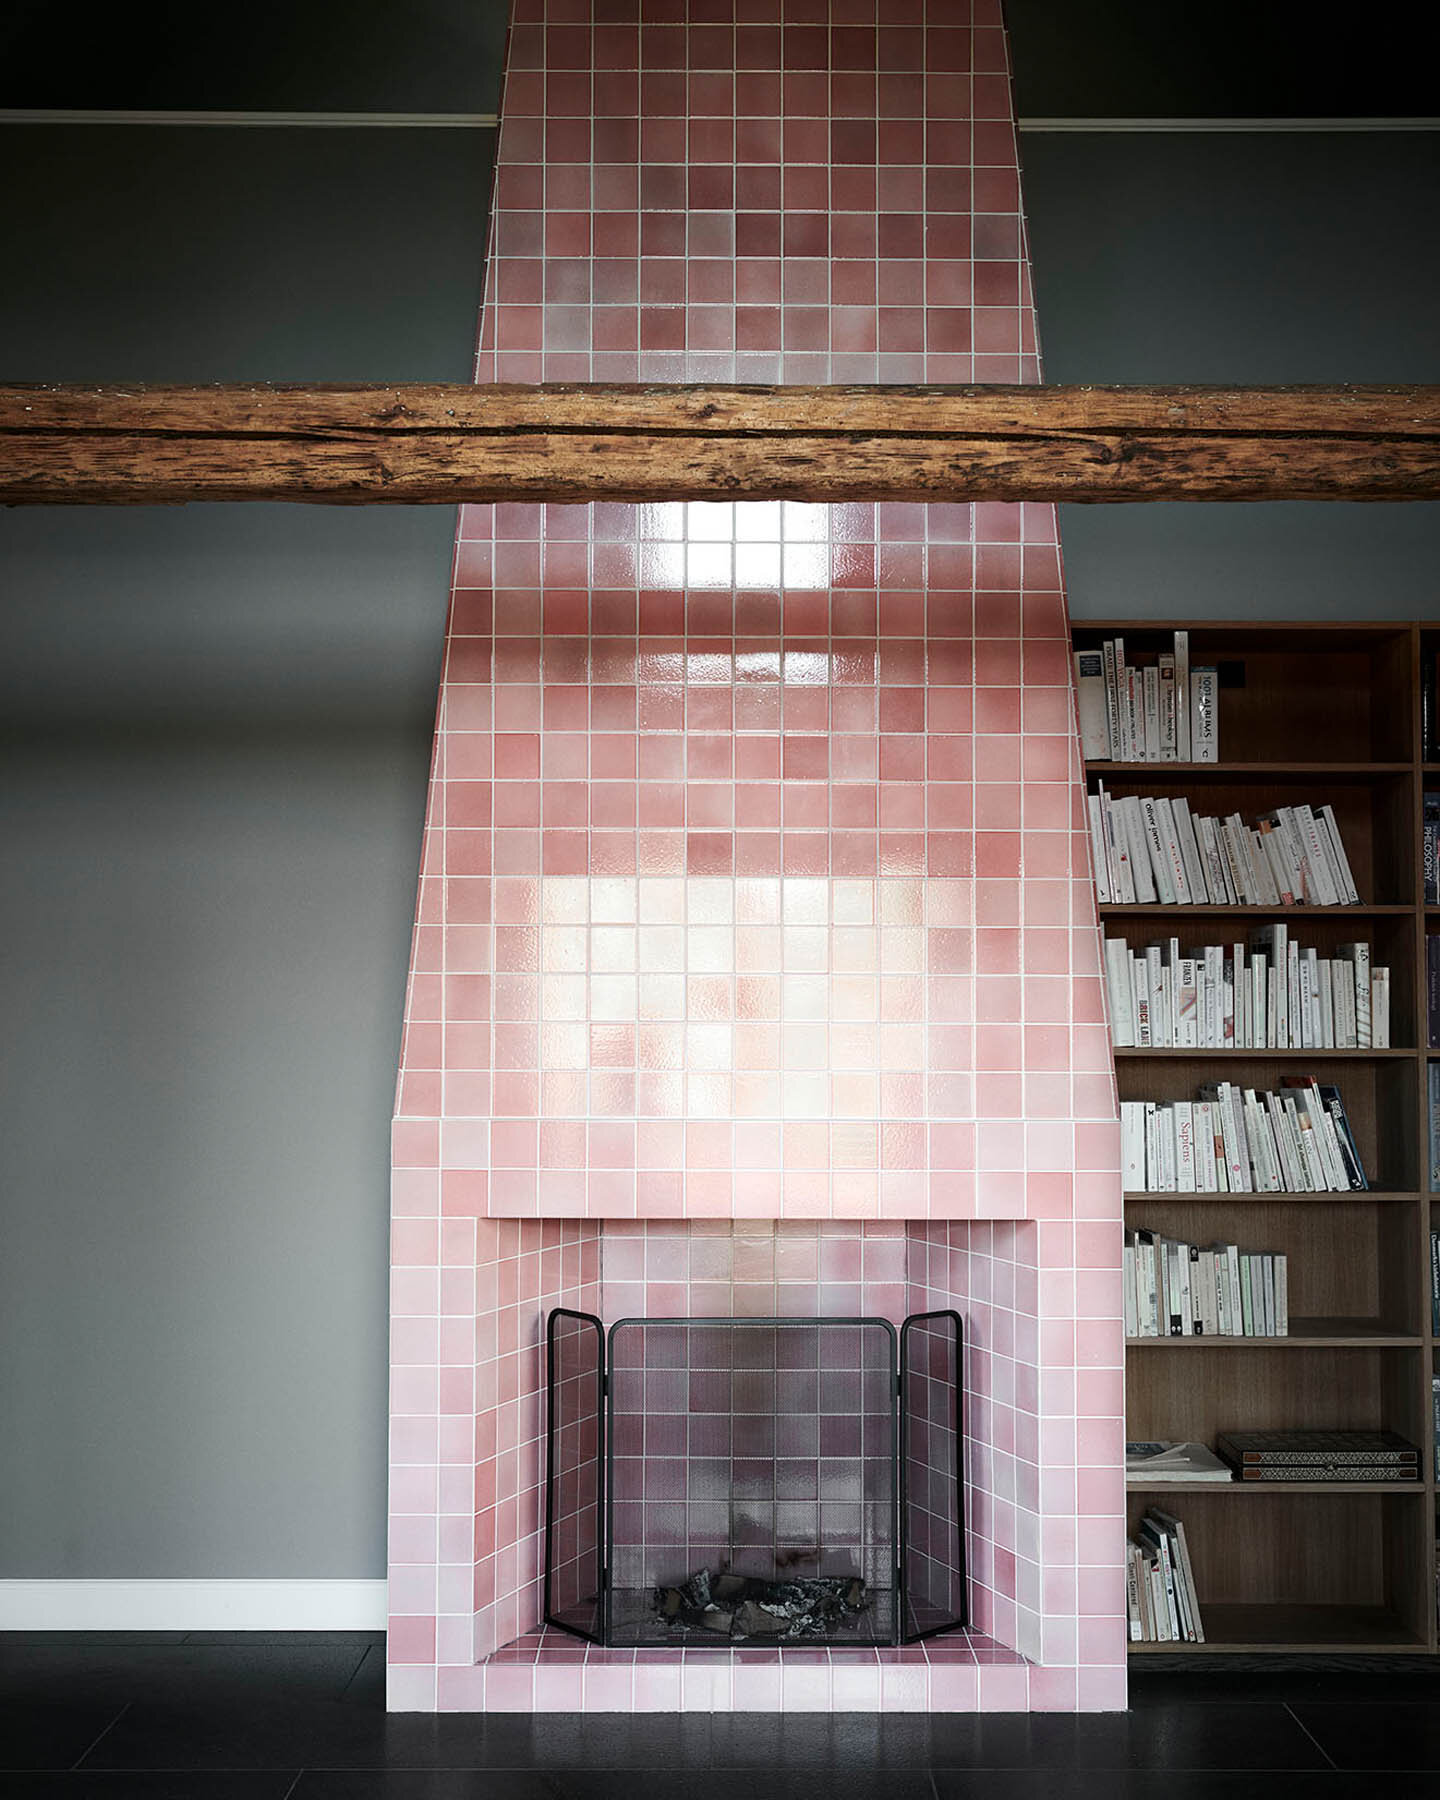 Chimney with clay tiles in format 10x10x1 cm glased with 'Coral Red Shiny Crystal'  (Copy)